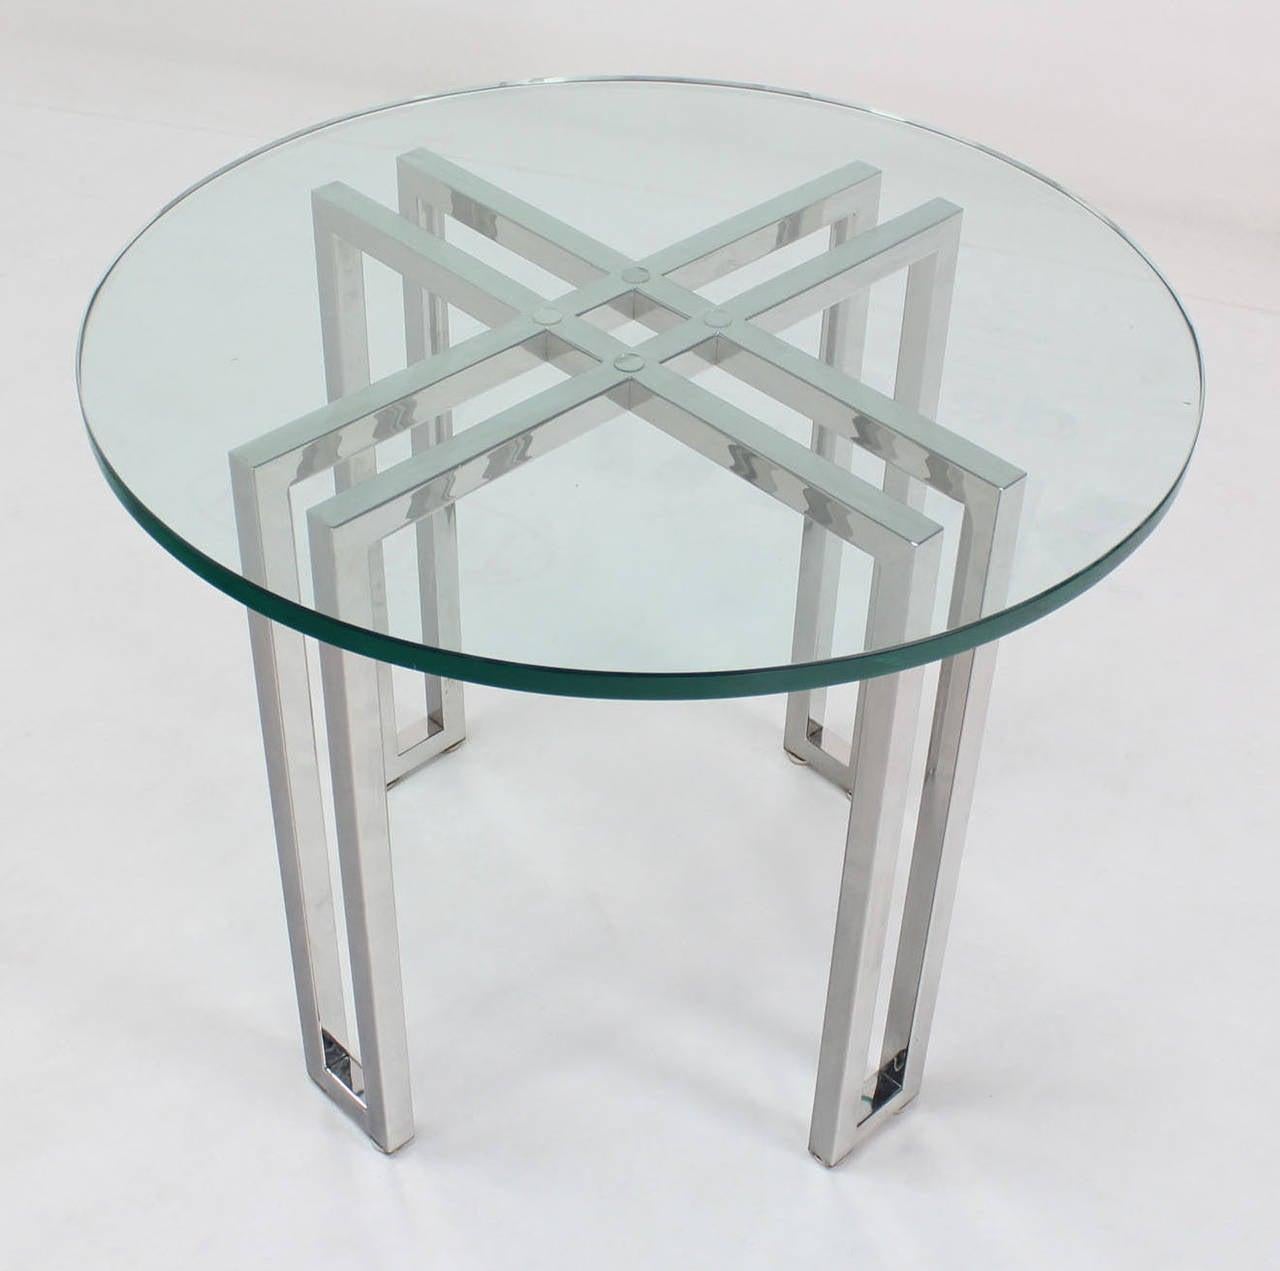 Quality studio made 3/4 inches thick glass top stand or side table on solid polished stainless steel base.